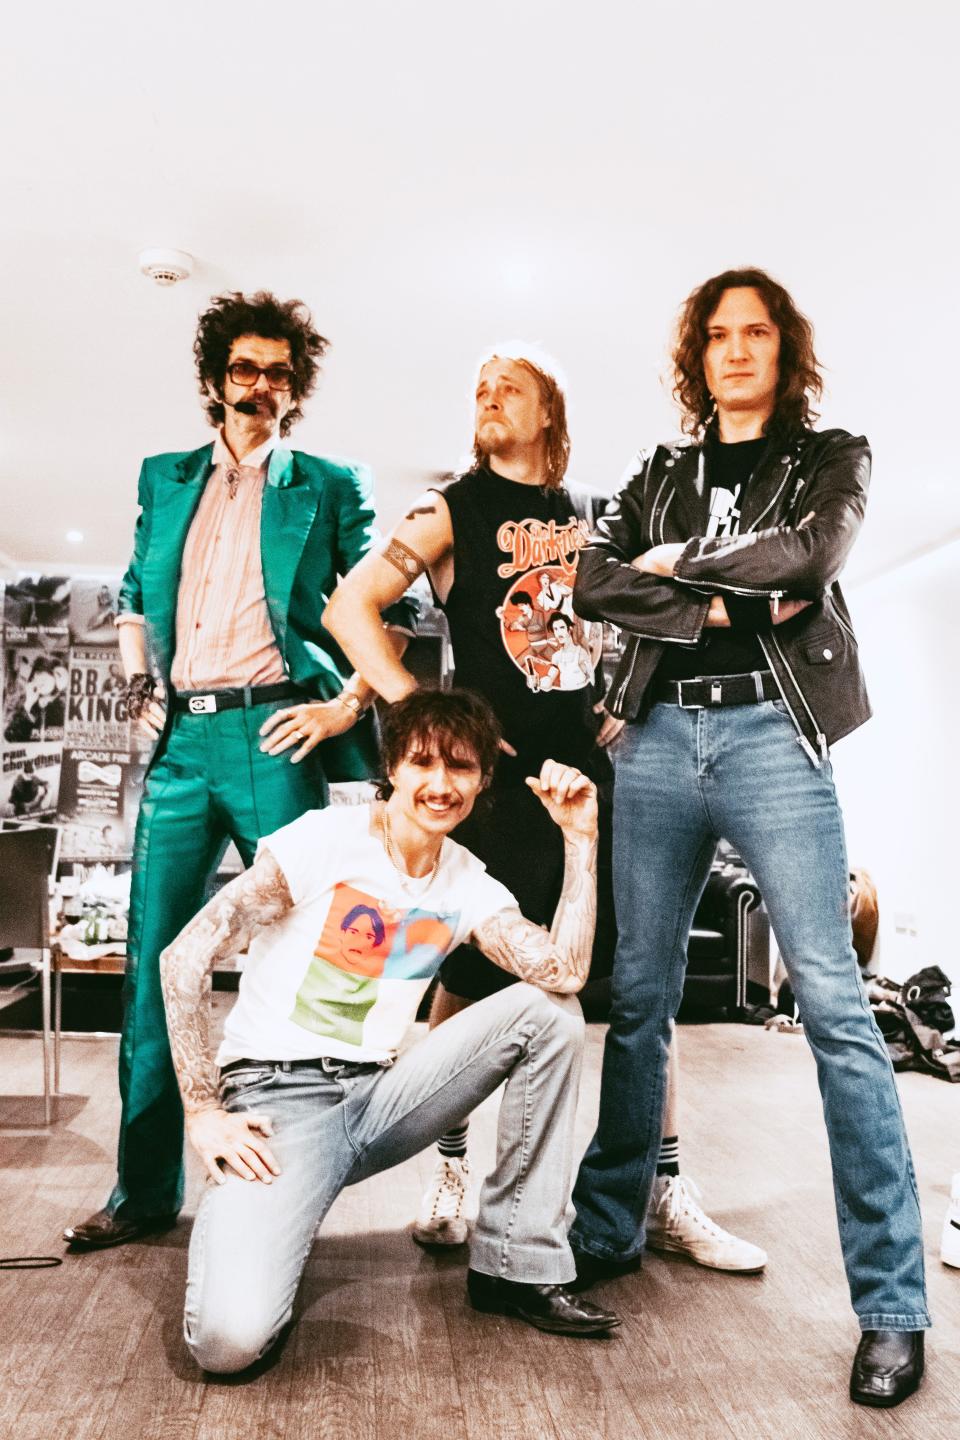 The Darkness: From left, bassist Frankie Poullain, singer Justin Hawkins, drummer Rufus Tiger Taylor and guitarist Dan Hawkins. The band is celebrating the 20th anniversary of its landmark "Permission to Land" album.